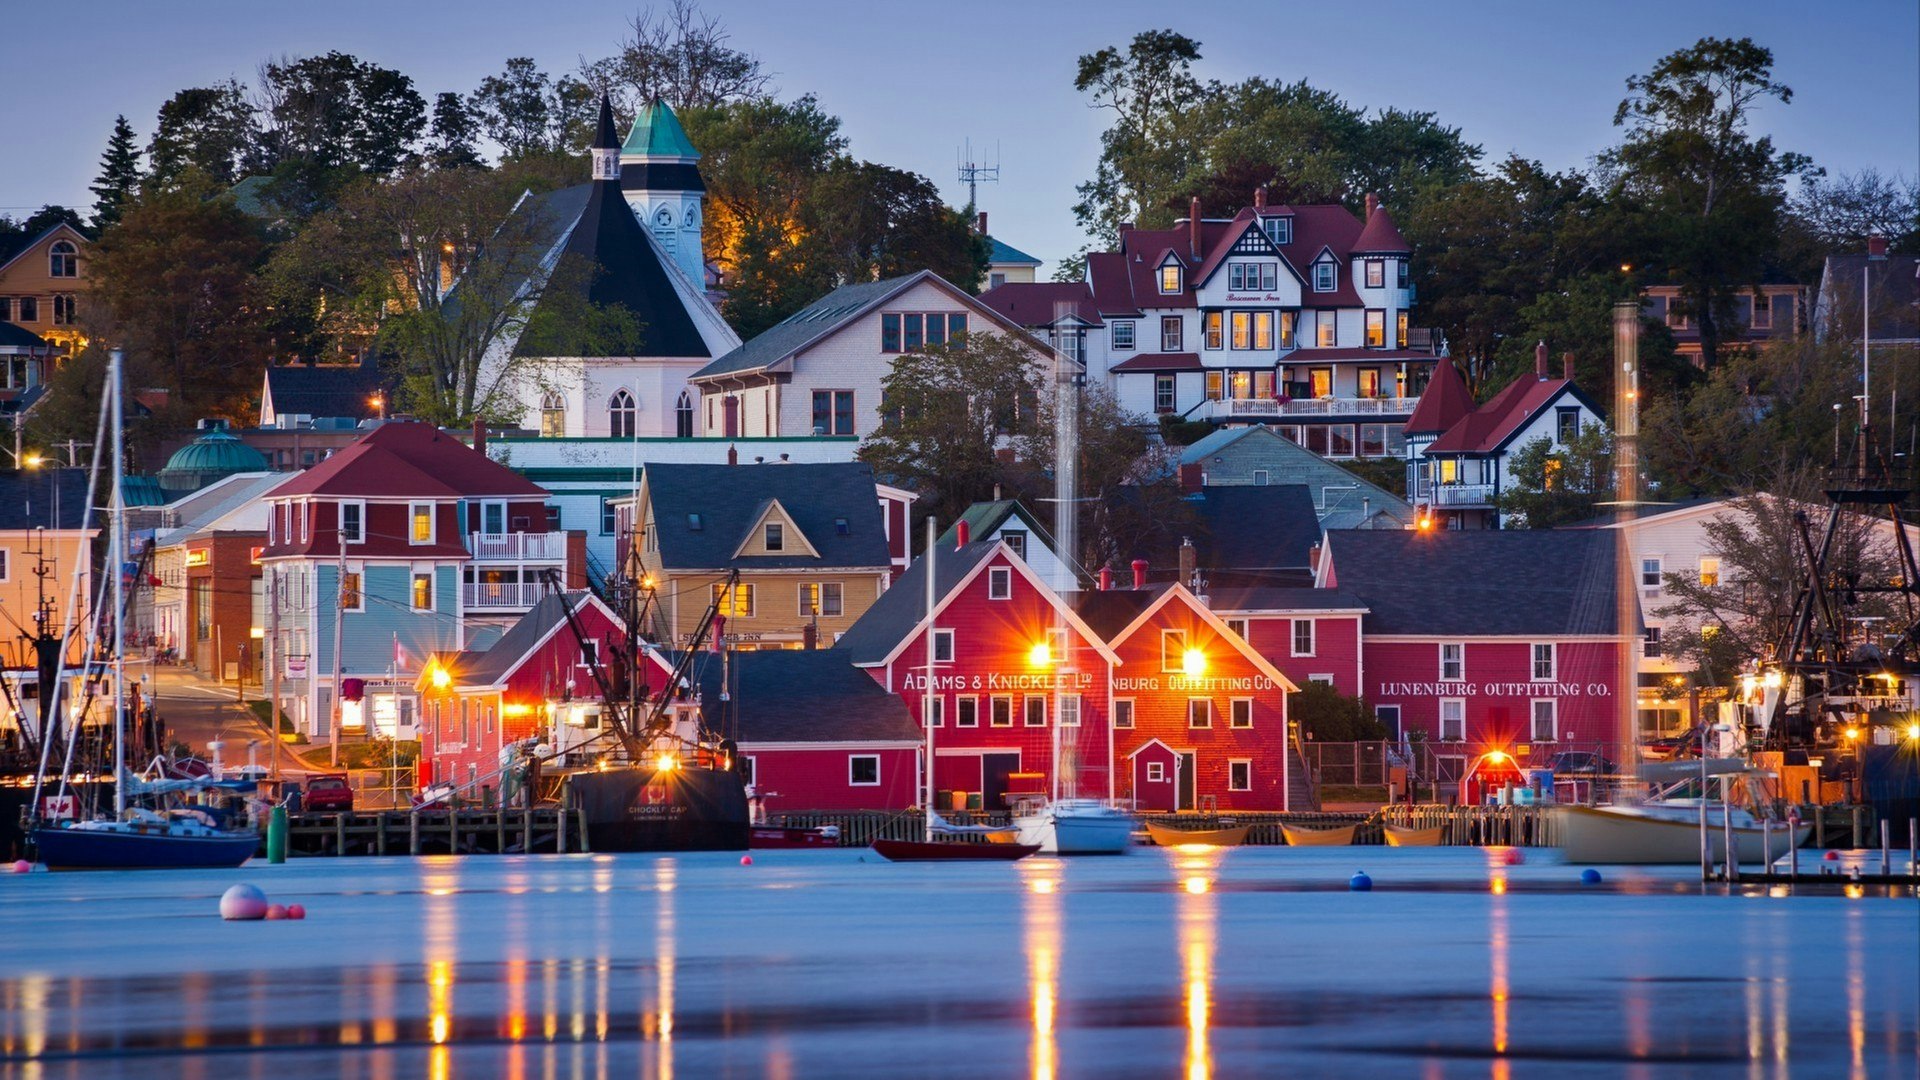 View of the famous harbour front of Lunenburg